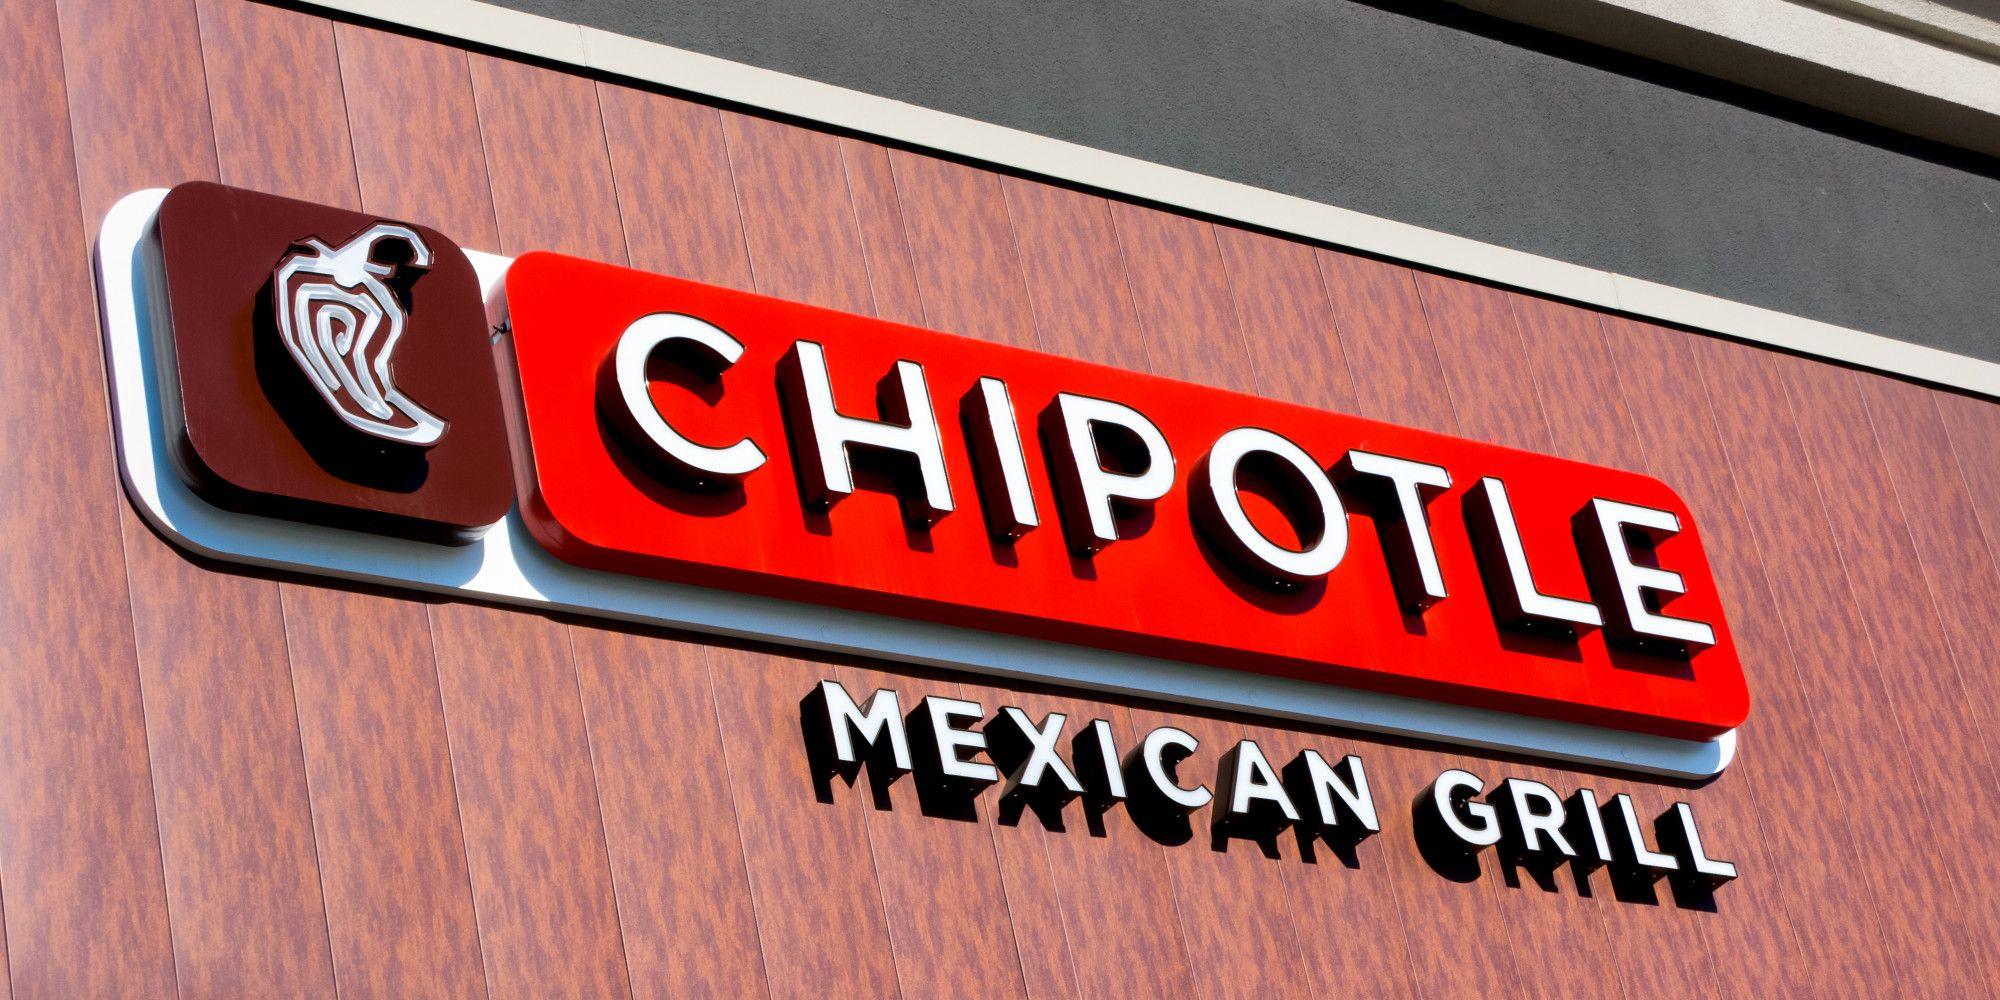 Chipotle Mexican Grill, Inc.(NYSE:CMG): Chipotle Mexican Grill